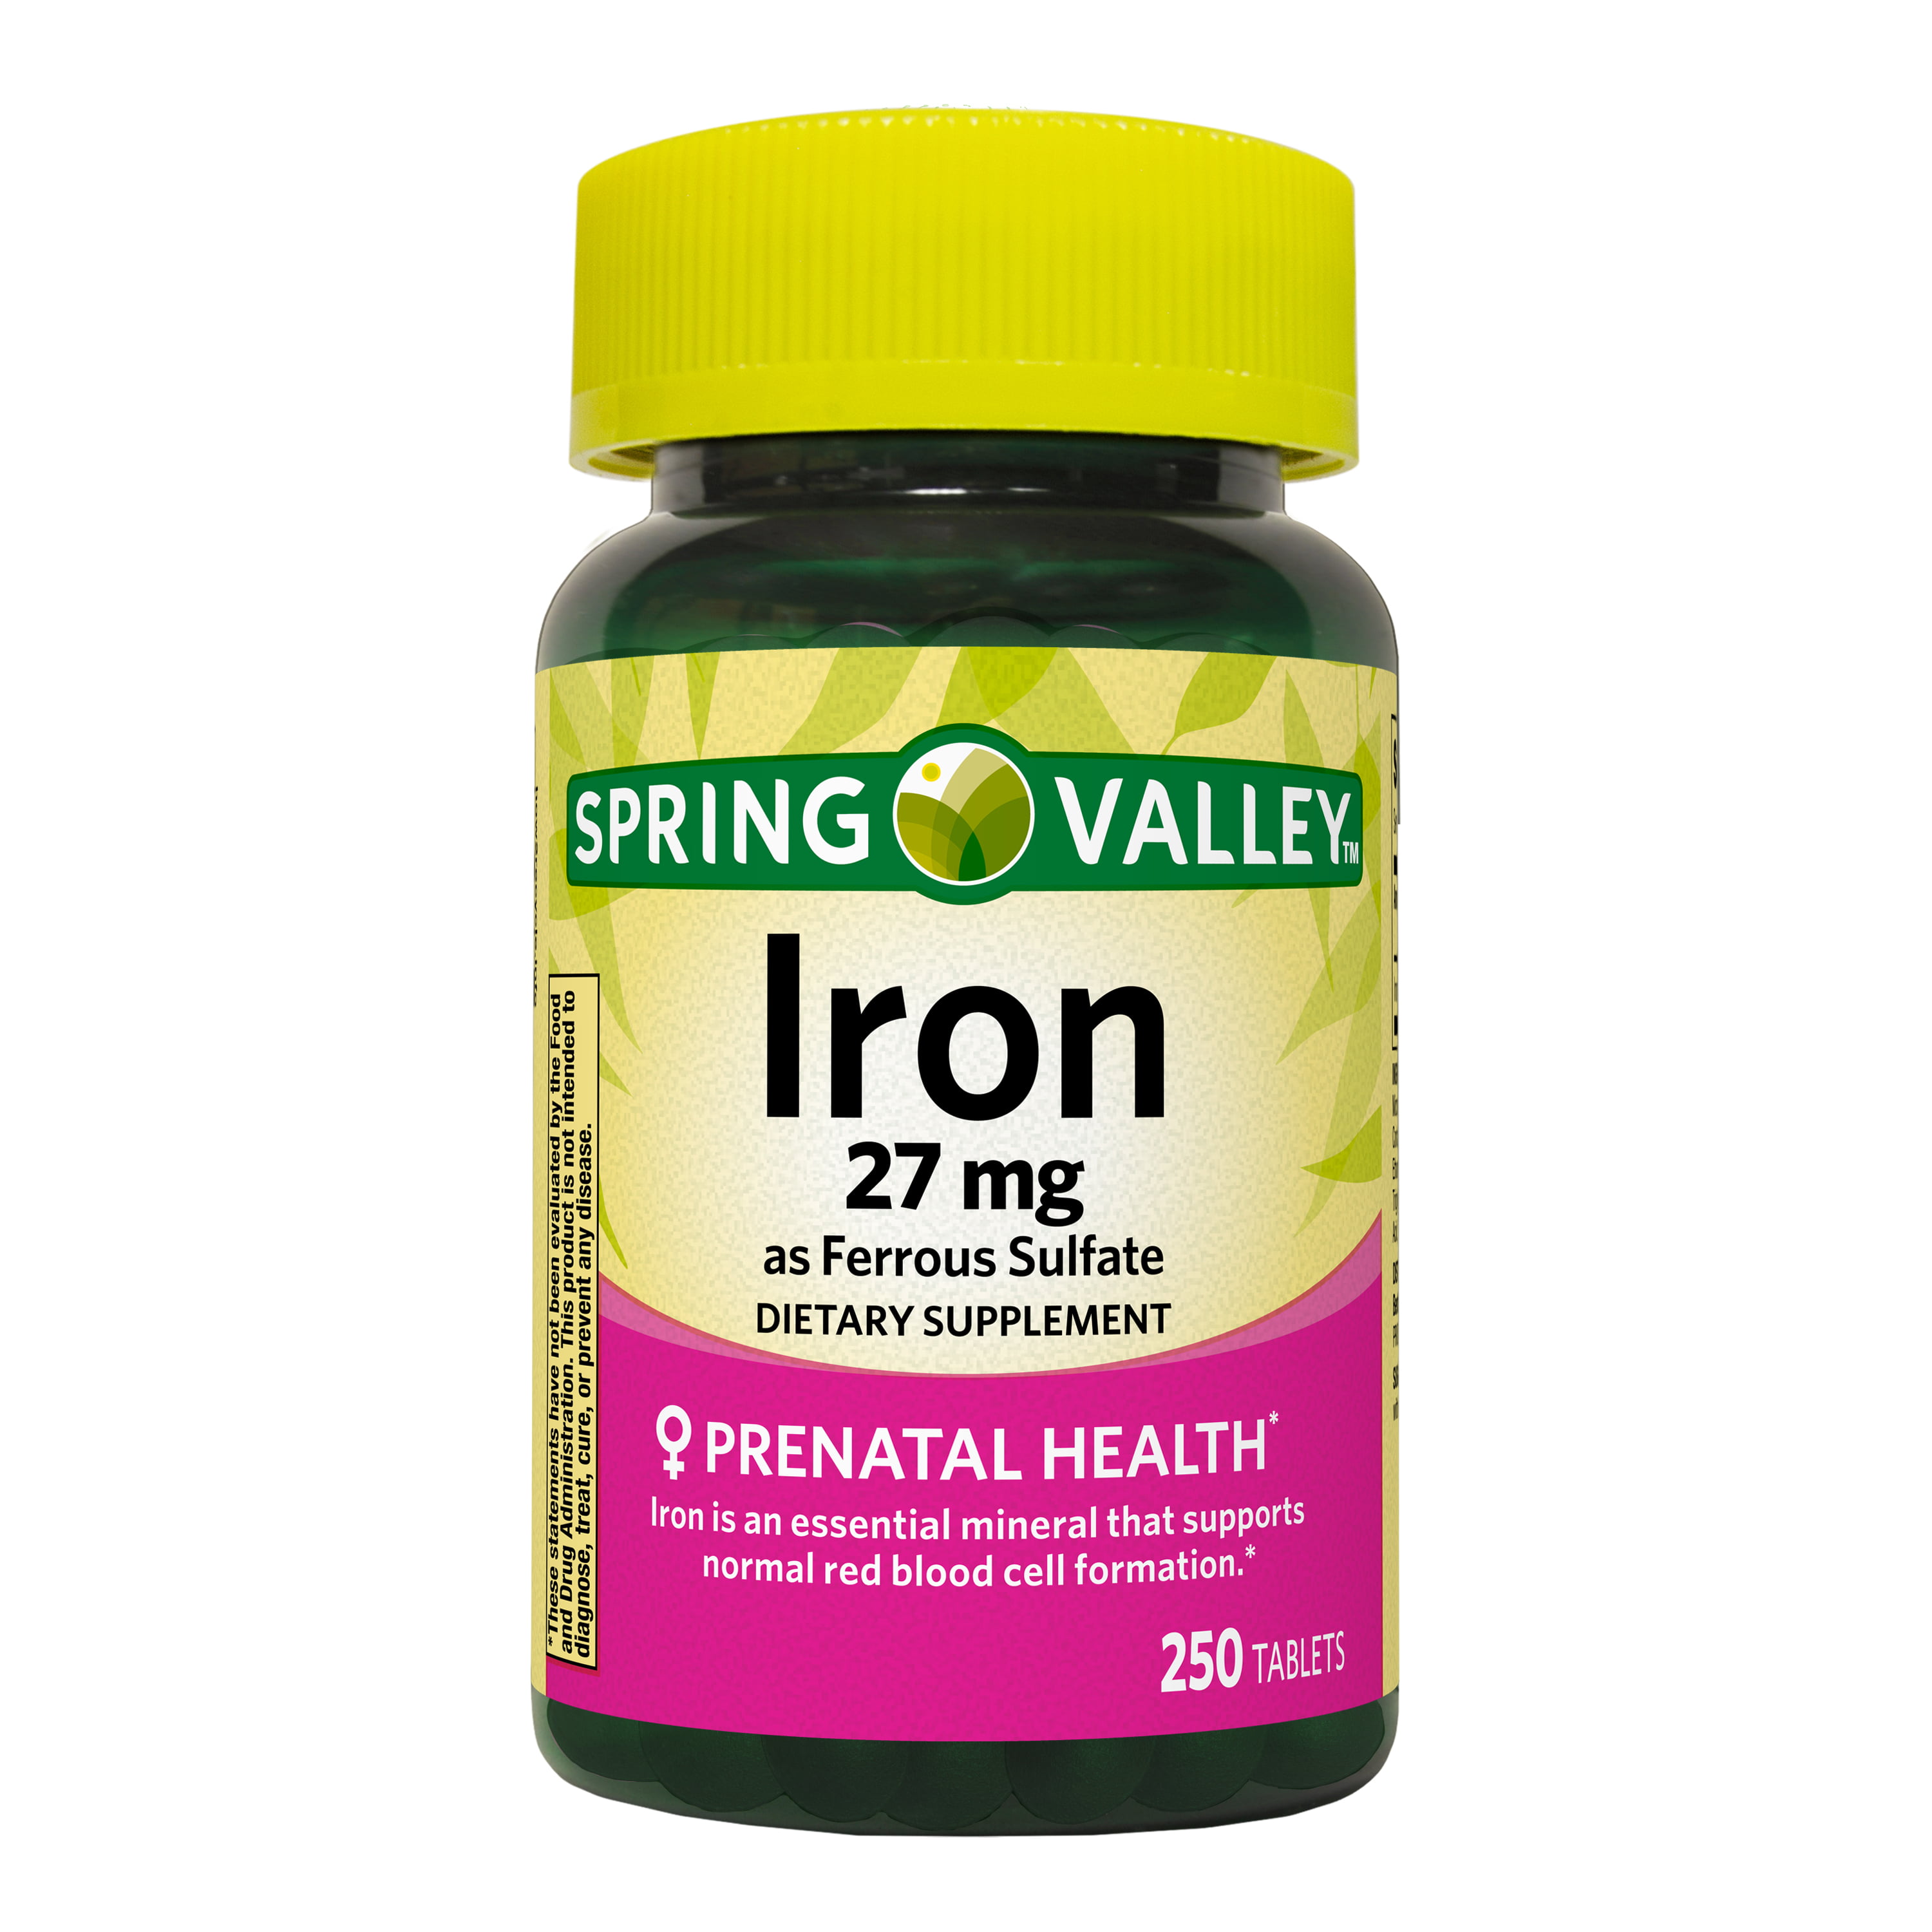 Spring Valley Iron Supplement, 27mg, 250 Tablets